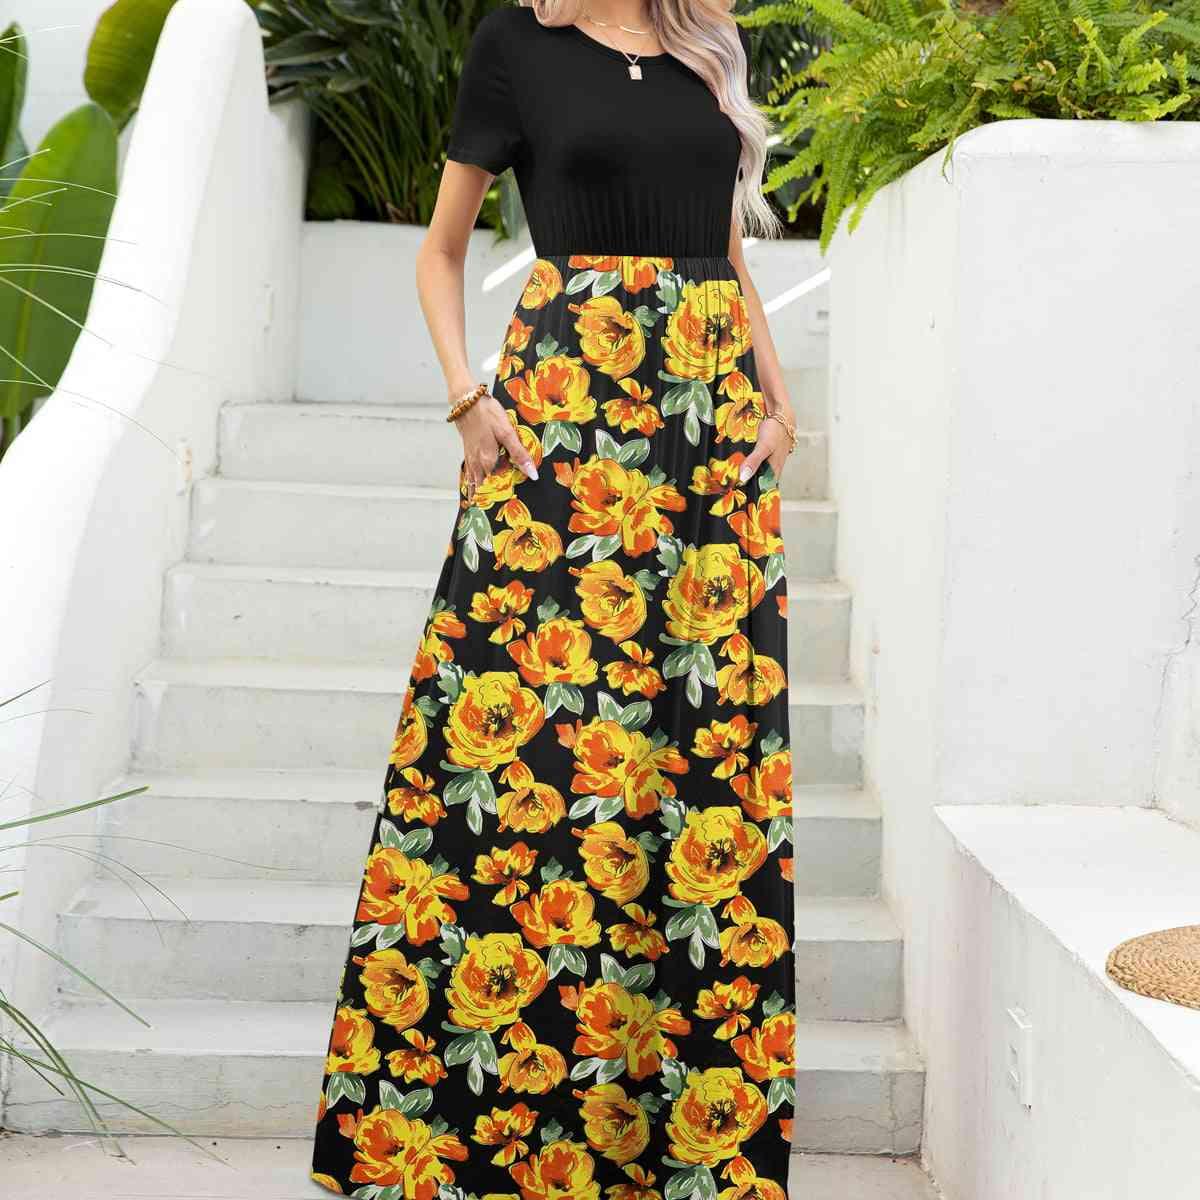 a woman wearing a black and yellow floral print skirt